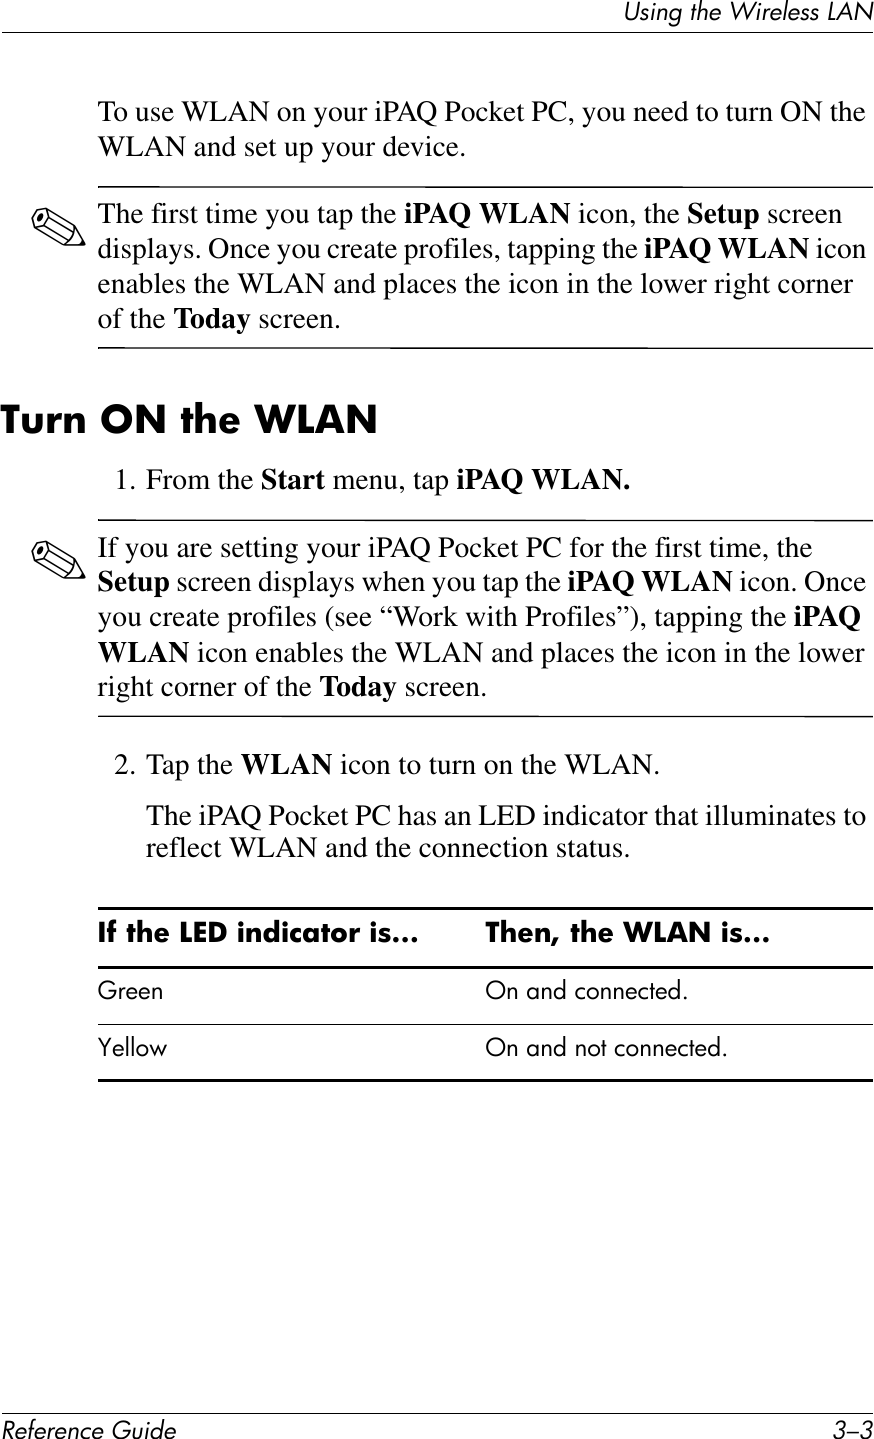 UL*%2&apos;1Q&quot;&apos;J*$&quot;K&quot;LL&apos;M&lt;N!&quot;#&quot;$&quot;%&amp;&quot;&apos;()*+&quot; 9/9To use WLAN on your iPAQ Pocket PC, you need to turn ON the WLAN and set up your device.✎The first time you tap the iPAQ WLAN icon, the Setup screen displays. Once you create profiles, tapping the iPAQ WLAN icon enables the WLAN and places the icon in the lower right corner of the Today screen.4(!$&amp;5.&amp;7?&quot;&amp;+A,.1. From the Start menu, tap iPAQ WLAN.✎If you are setting your iPAQ Pocket PC for the first time, the Setup screen displays when you tap the iPAQ WLAN icon. Once you create profiles (see “Work with Profiles”), tapping the iPAQ WLAN icon enables the WLAN and places the icon in the lower right corner of the Today screen.2. Tap the WLAN icon to turn on the WLAN.The iPAQ Pocket PC has an LED indicator that illuminates to reflect WLAN and the connection status./#&amp;7?&quot;&amp;A^U&amp;)$*)%;76!&amp;)8___ 4?&quot;$d&amp;7?&quot;&amp;+A,.&amp;)8___g2++6 ]6#76C#)(66+),+CGh+DD(E ]6#76C#6(,#)(66+),+CG